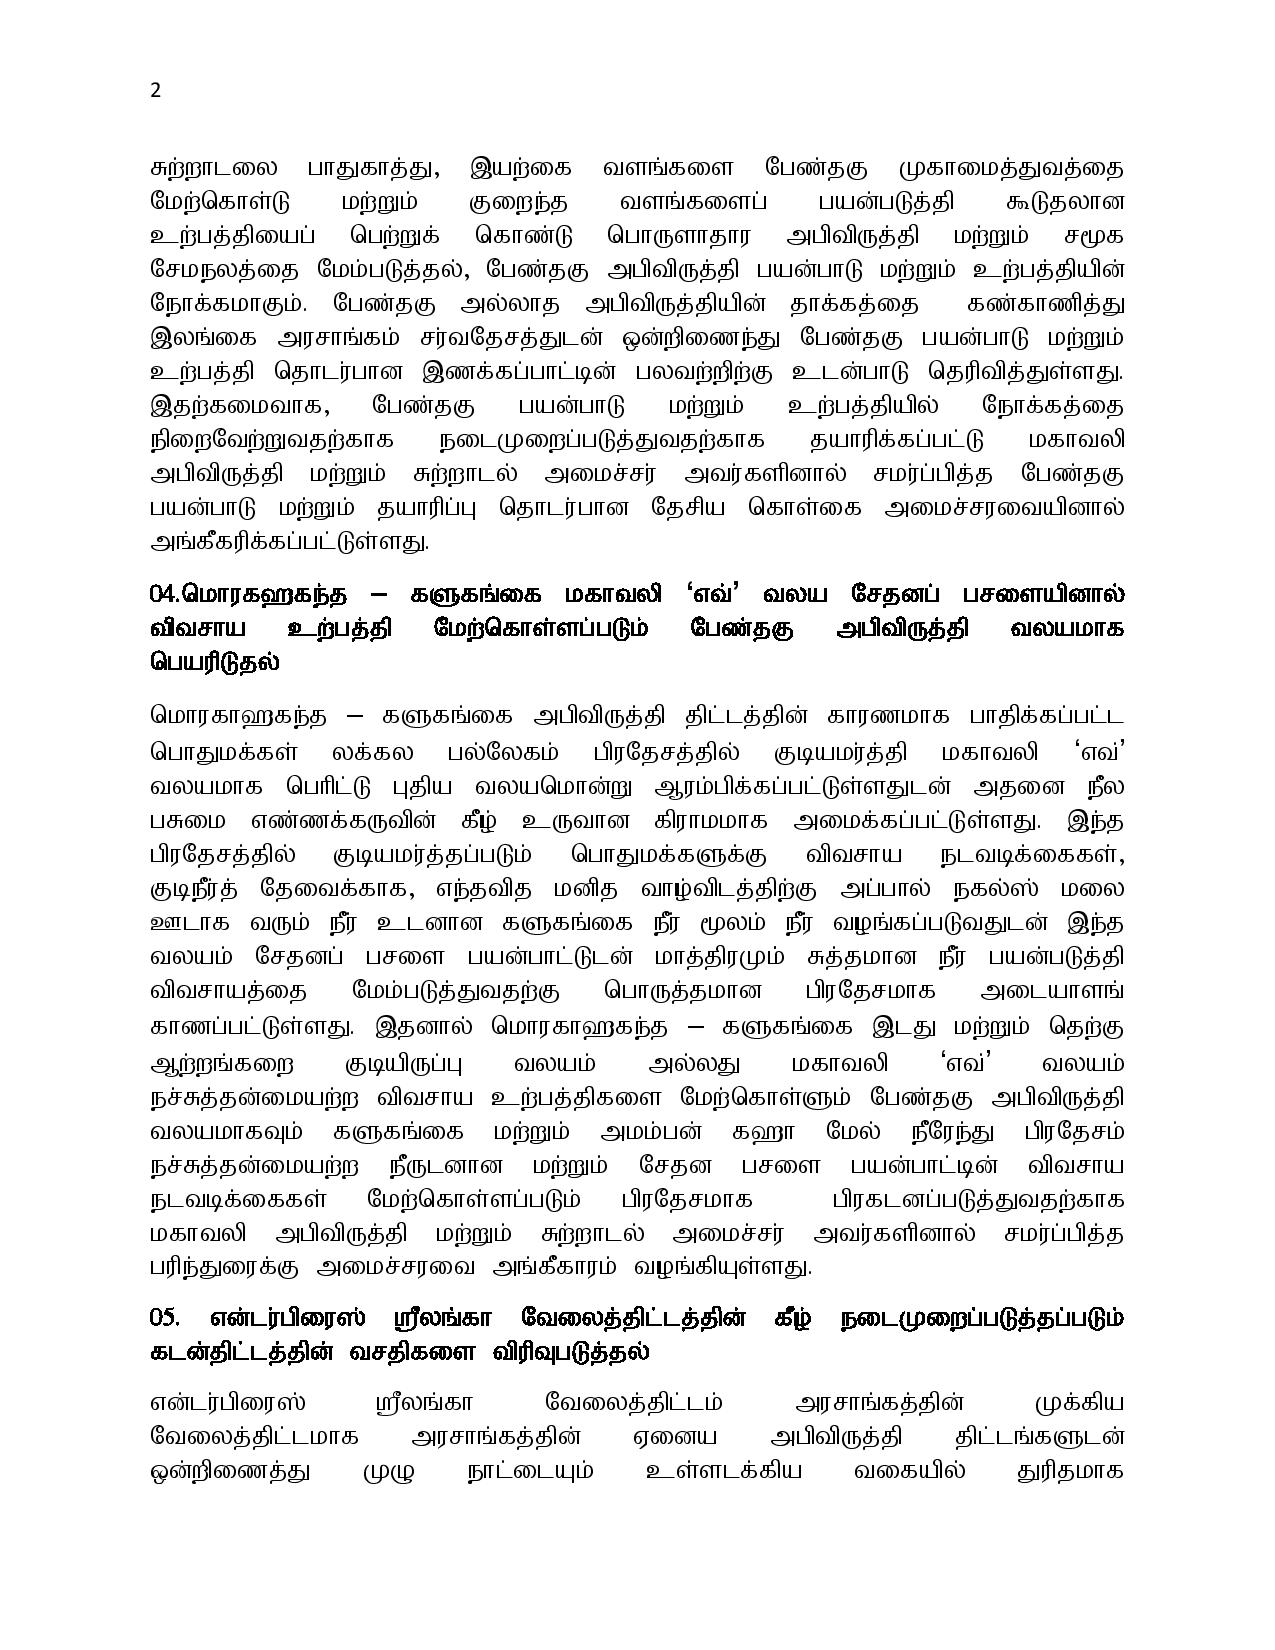 29.10.2019 cabinet tamil page 002